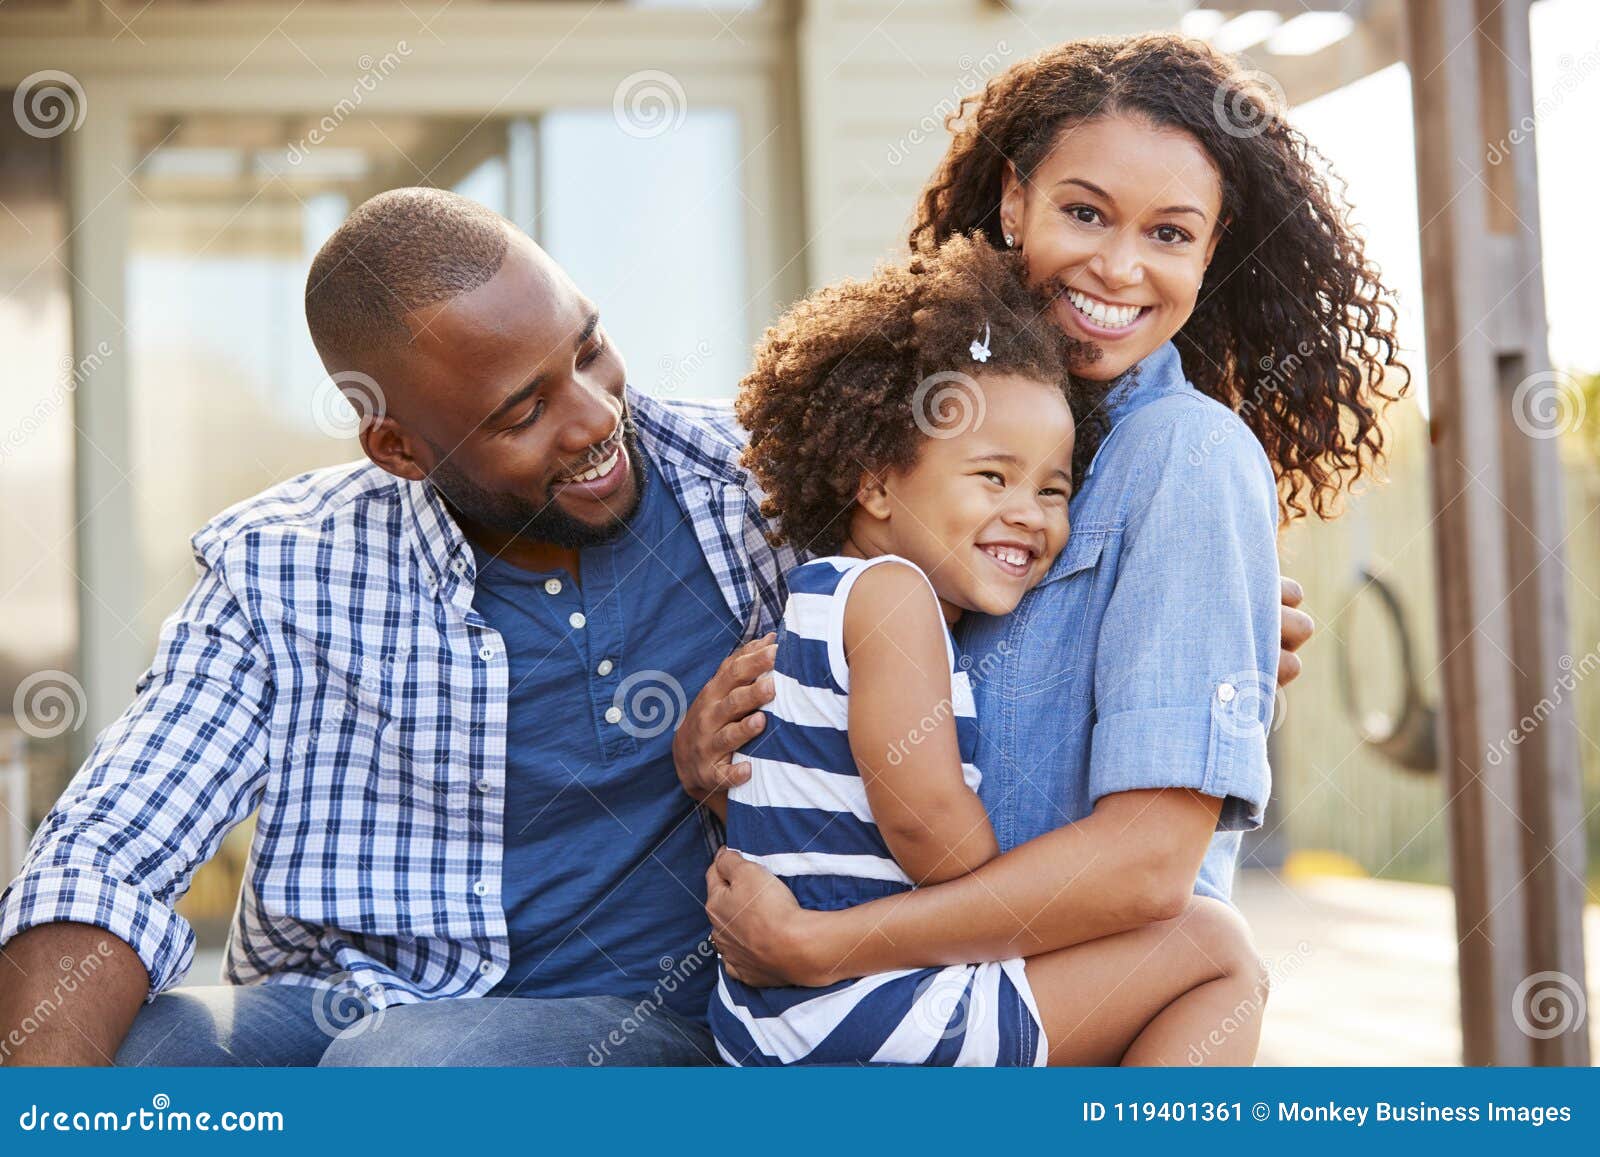 black family embracing outdoors smiling to camera outside